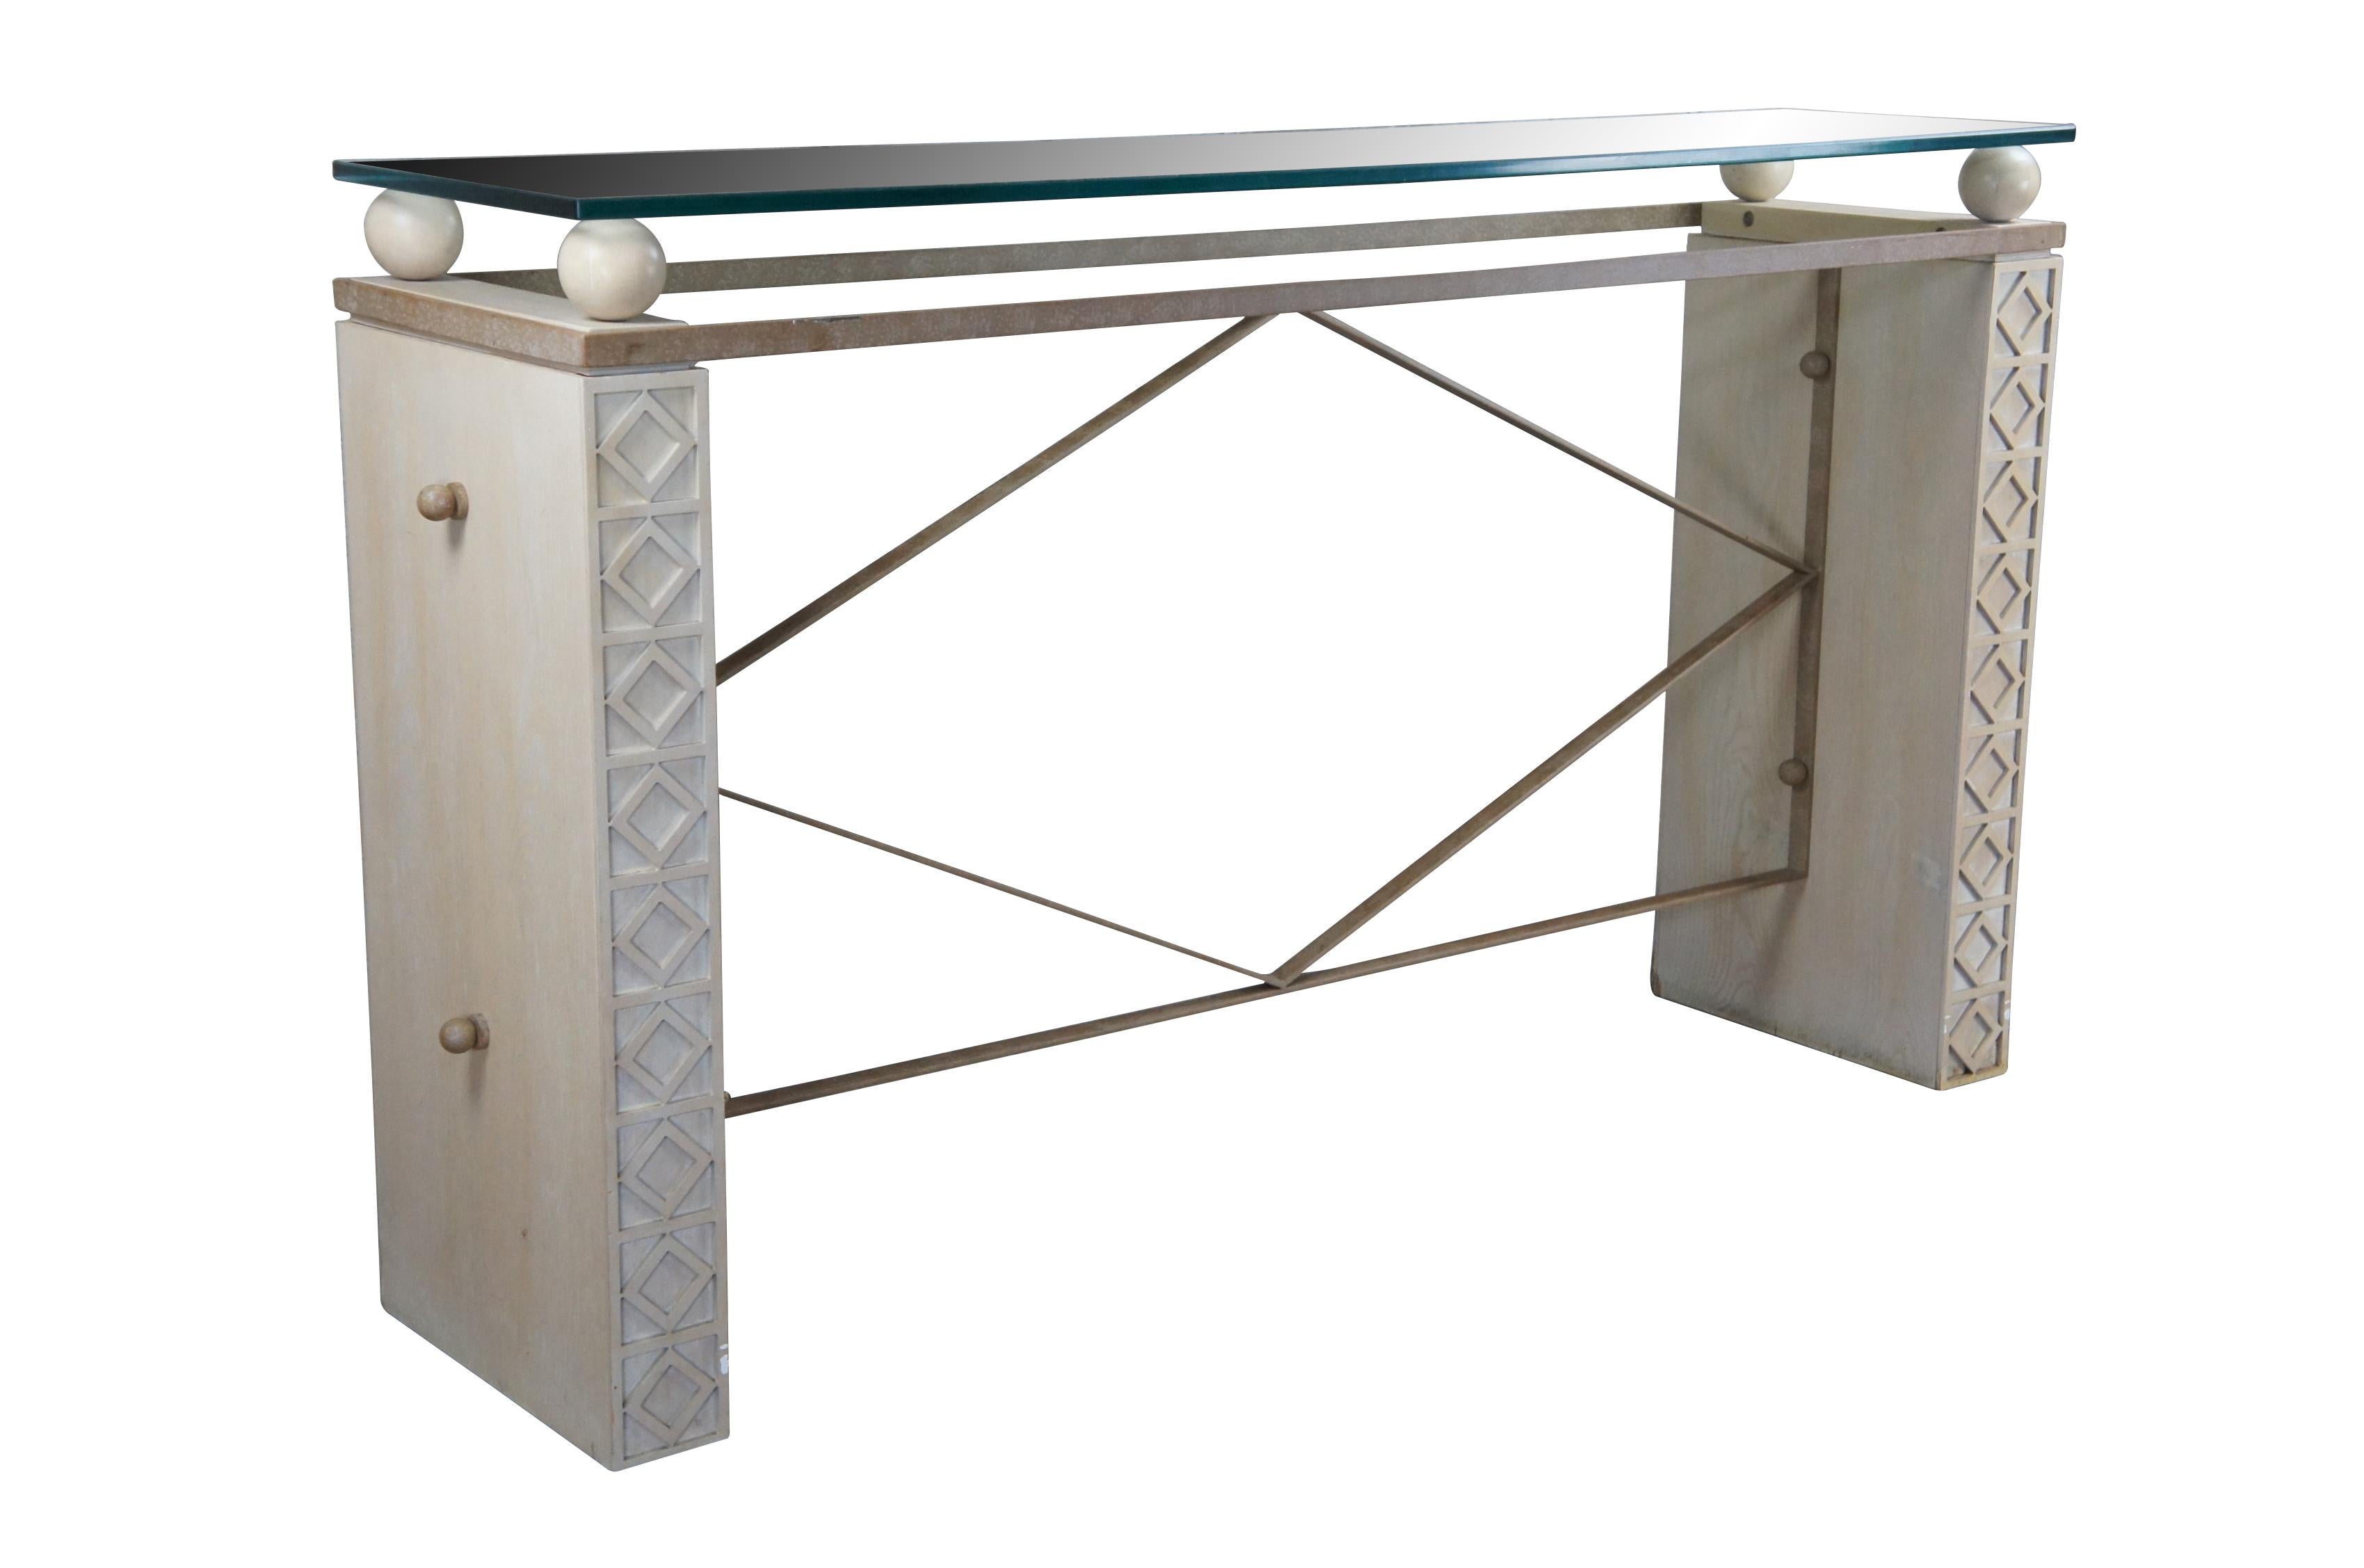 American Mid-Century console table with two solid limed oak side pedestals / panels with a carved diamond pattern fretwork, connected by an iron frame, with a thick glass top set on four round ball / sphere supports.

Dimensions:
64